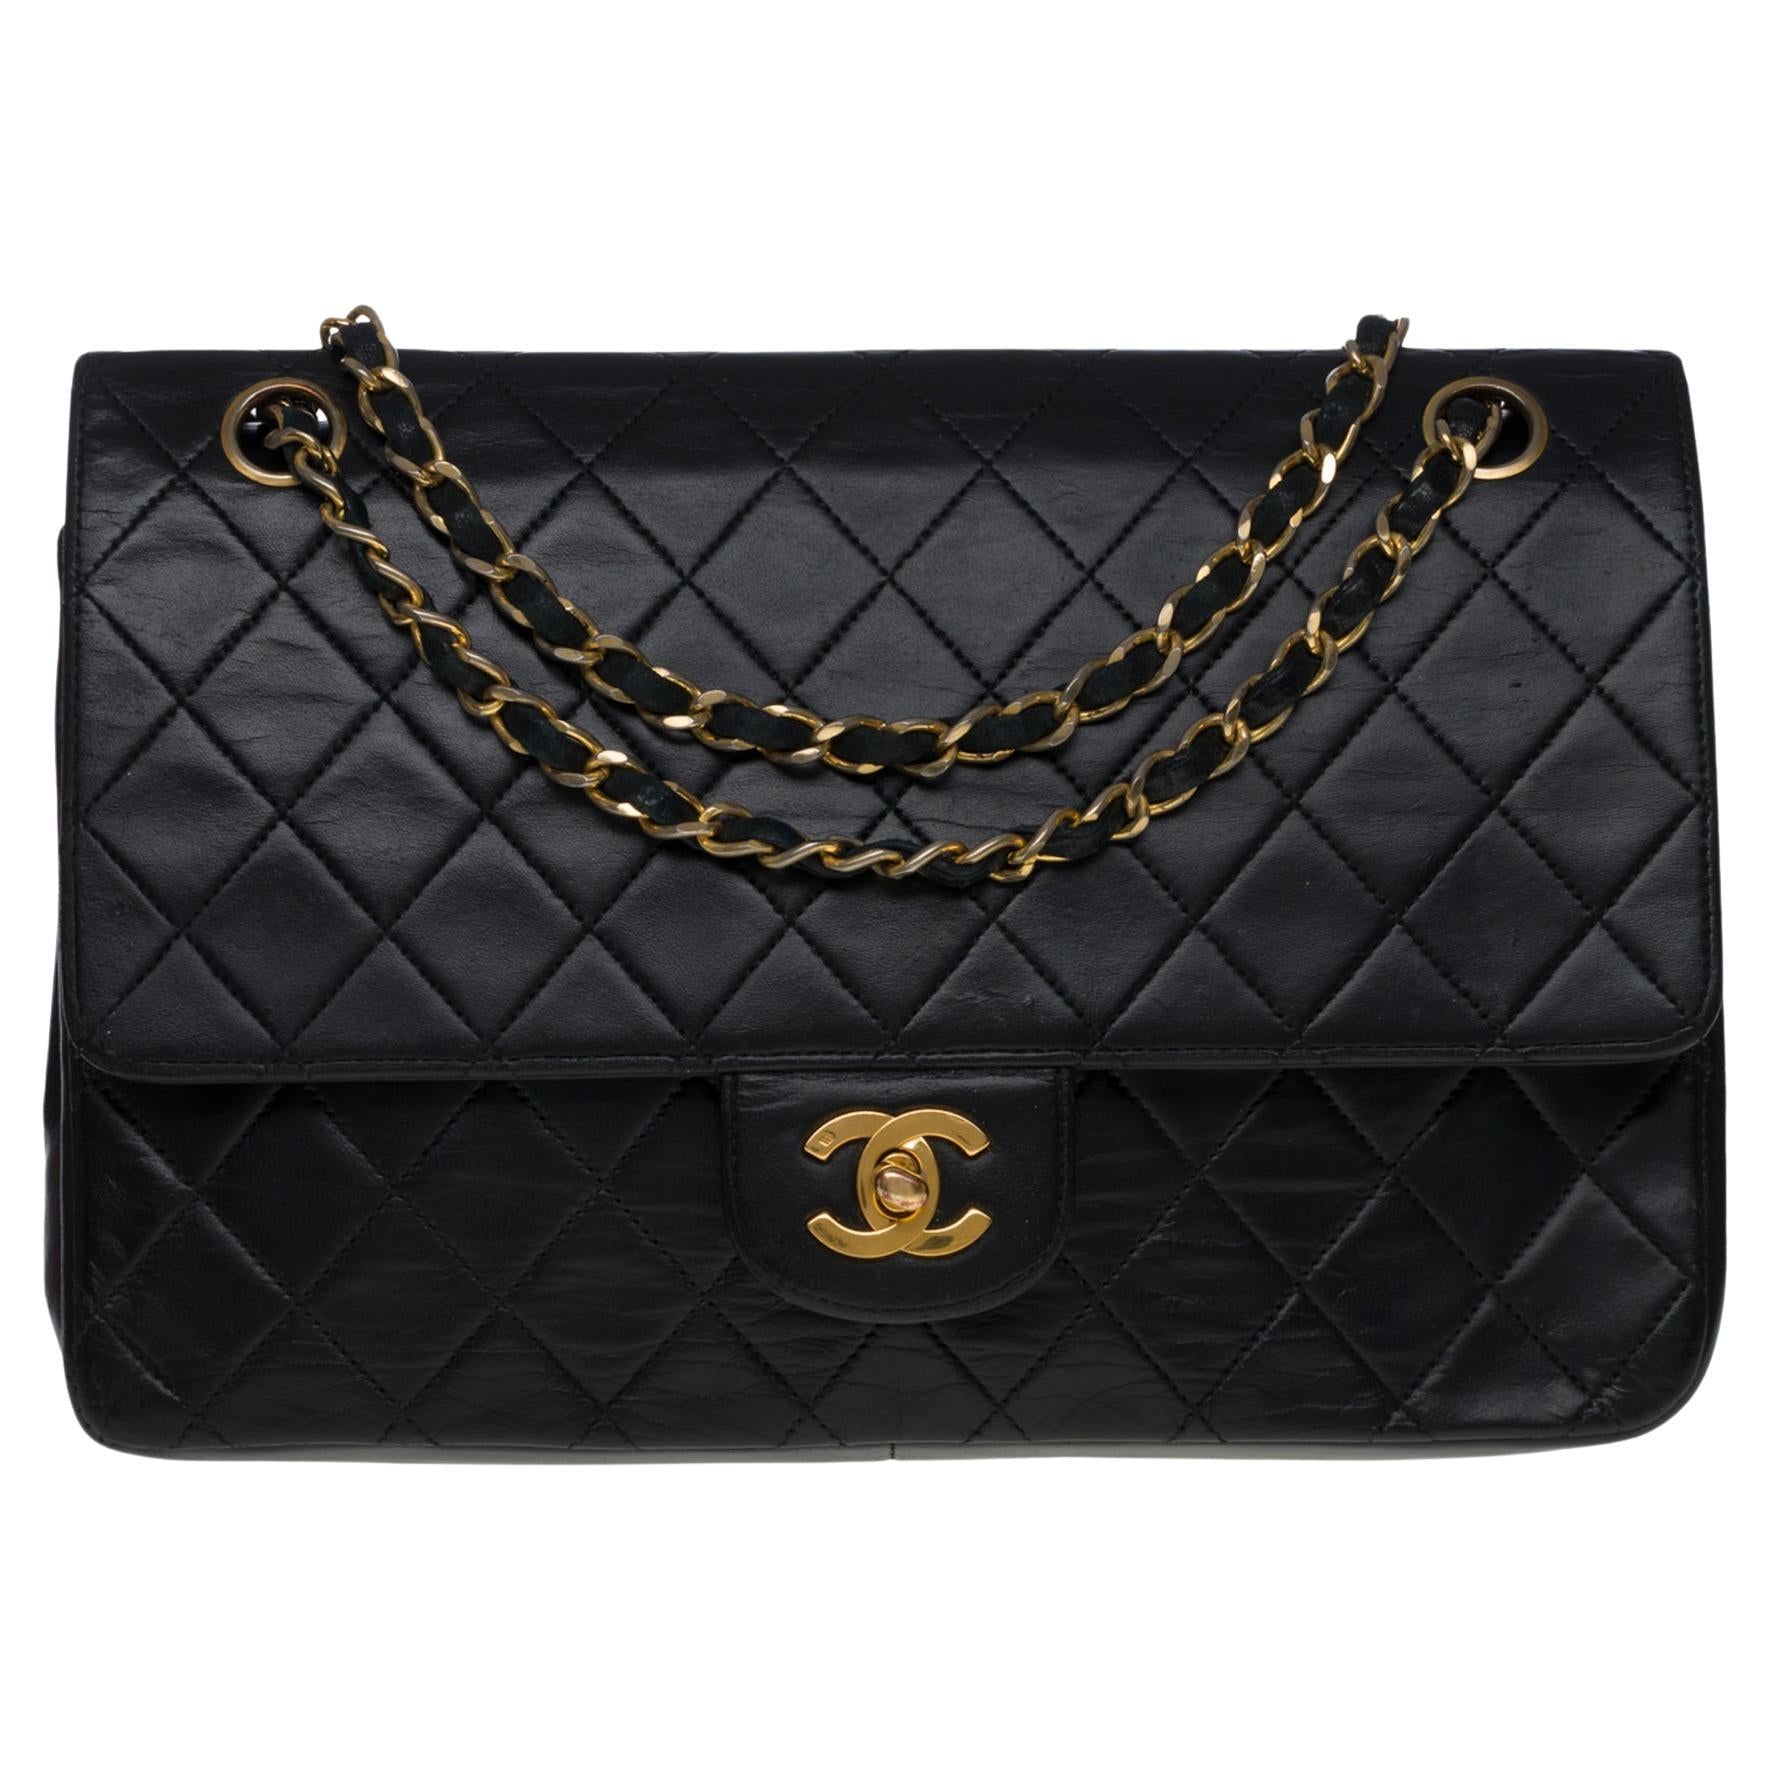 CHANEL Timeless/Classic double Flap shoulder bag in black quilted lamb